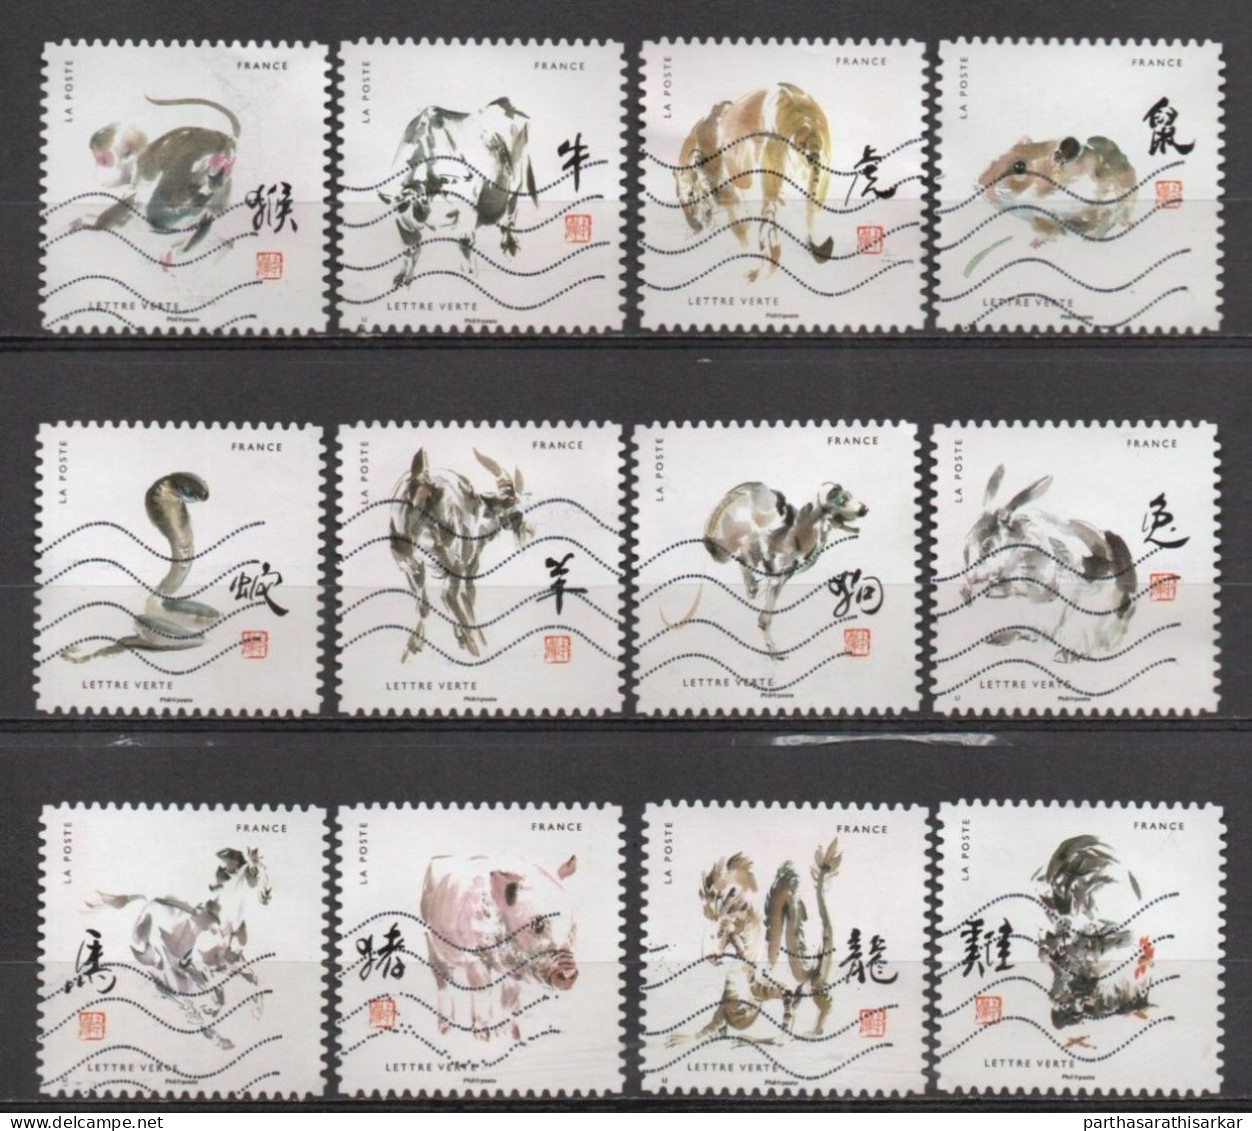 FRANCE 2017 CHINESE ZODIAC SIGNS COMPLETE SET USED RARE - Usati